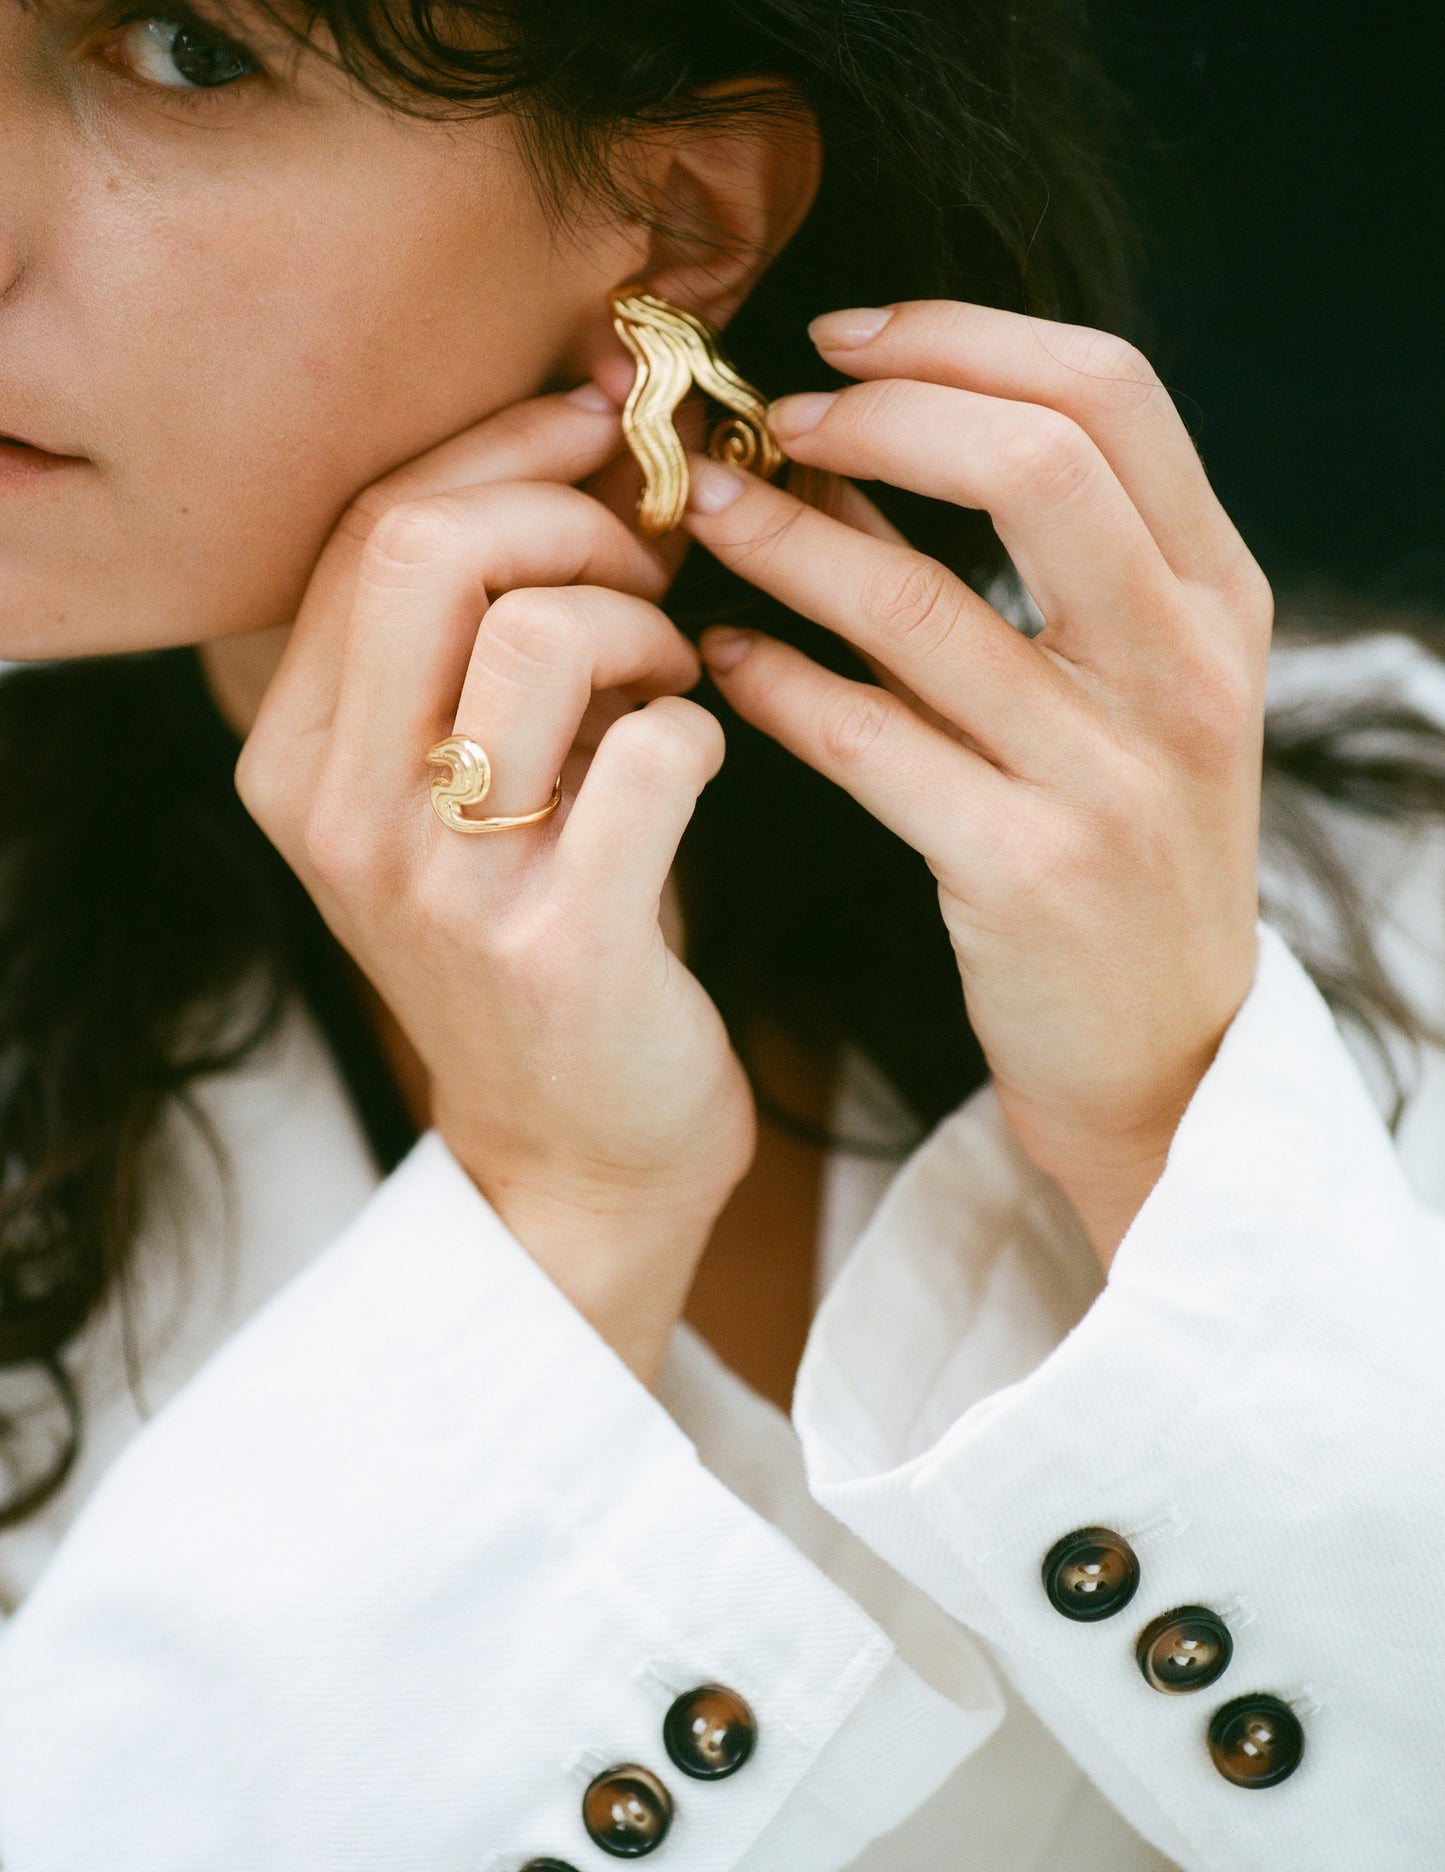 Model with white suit touching her gold earrings